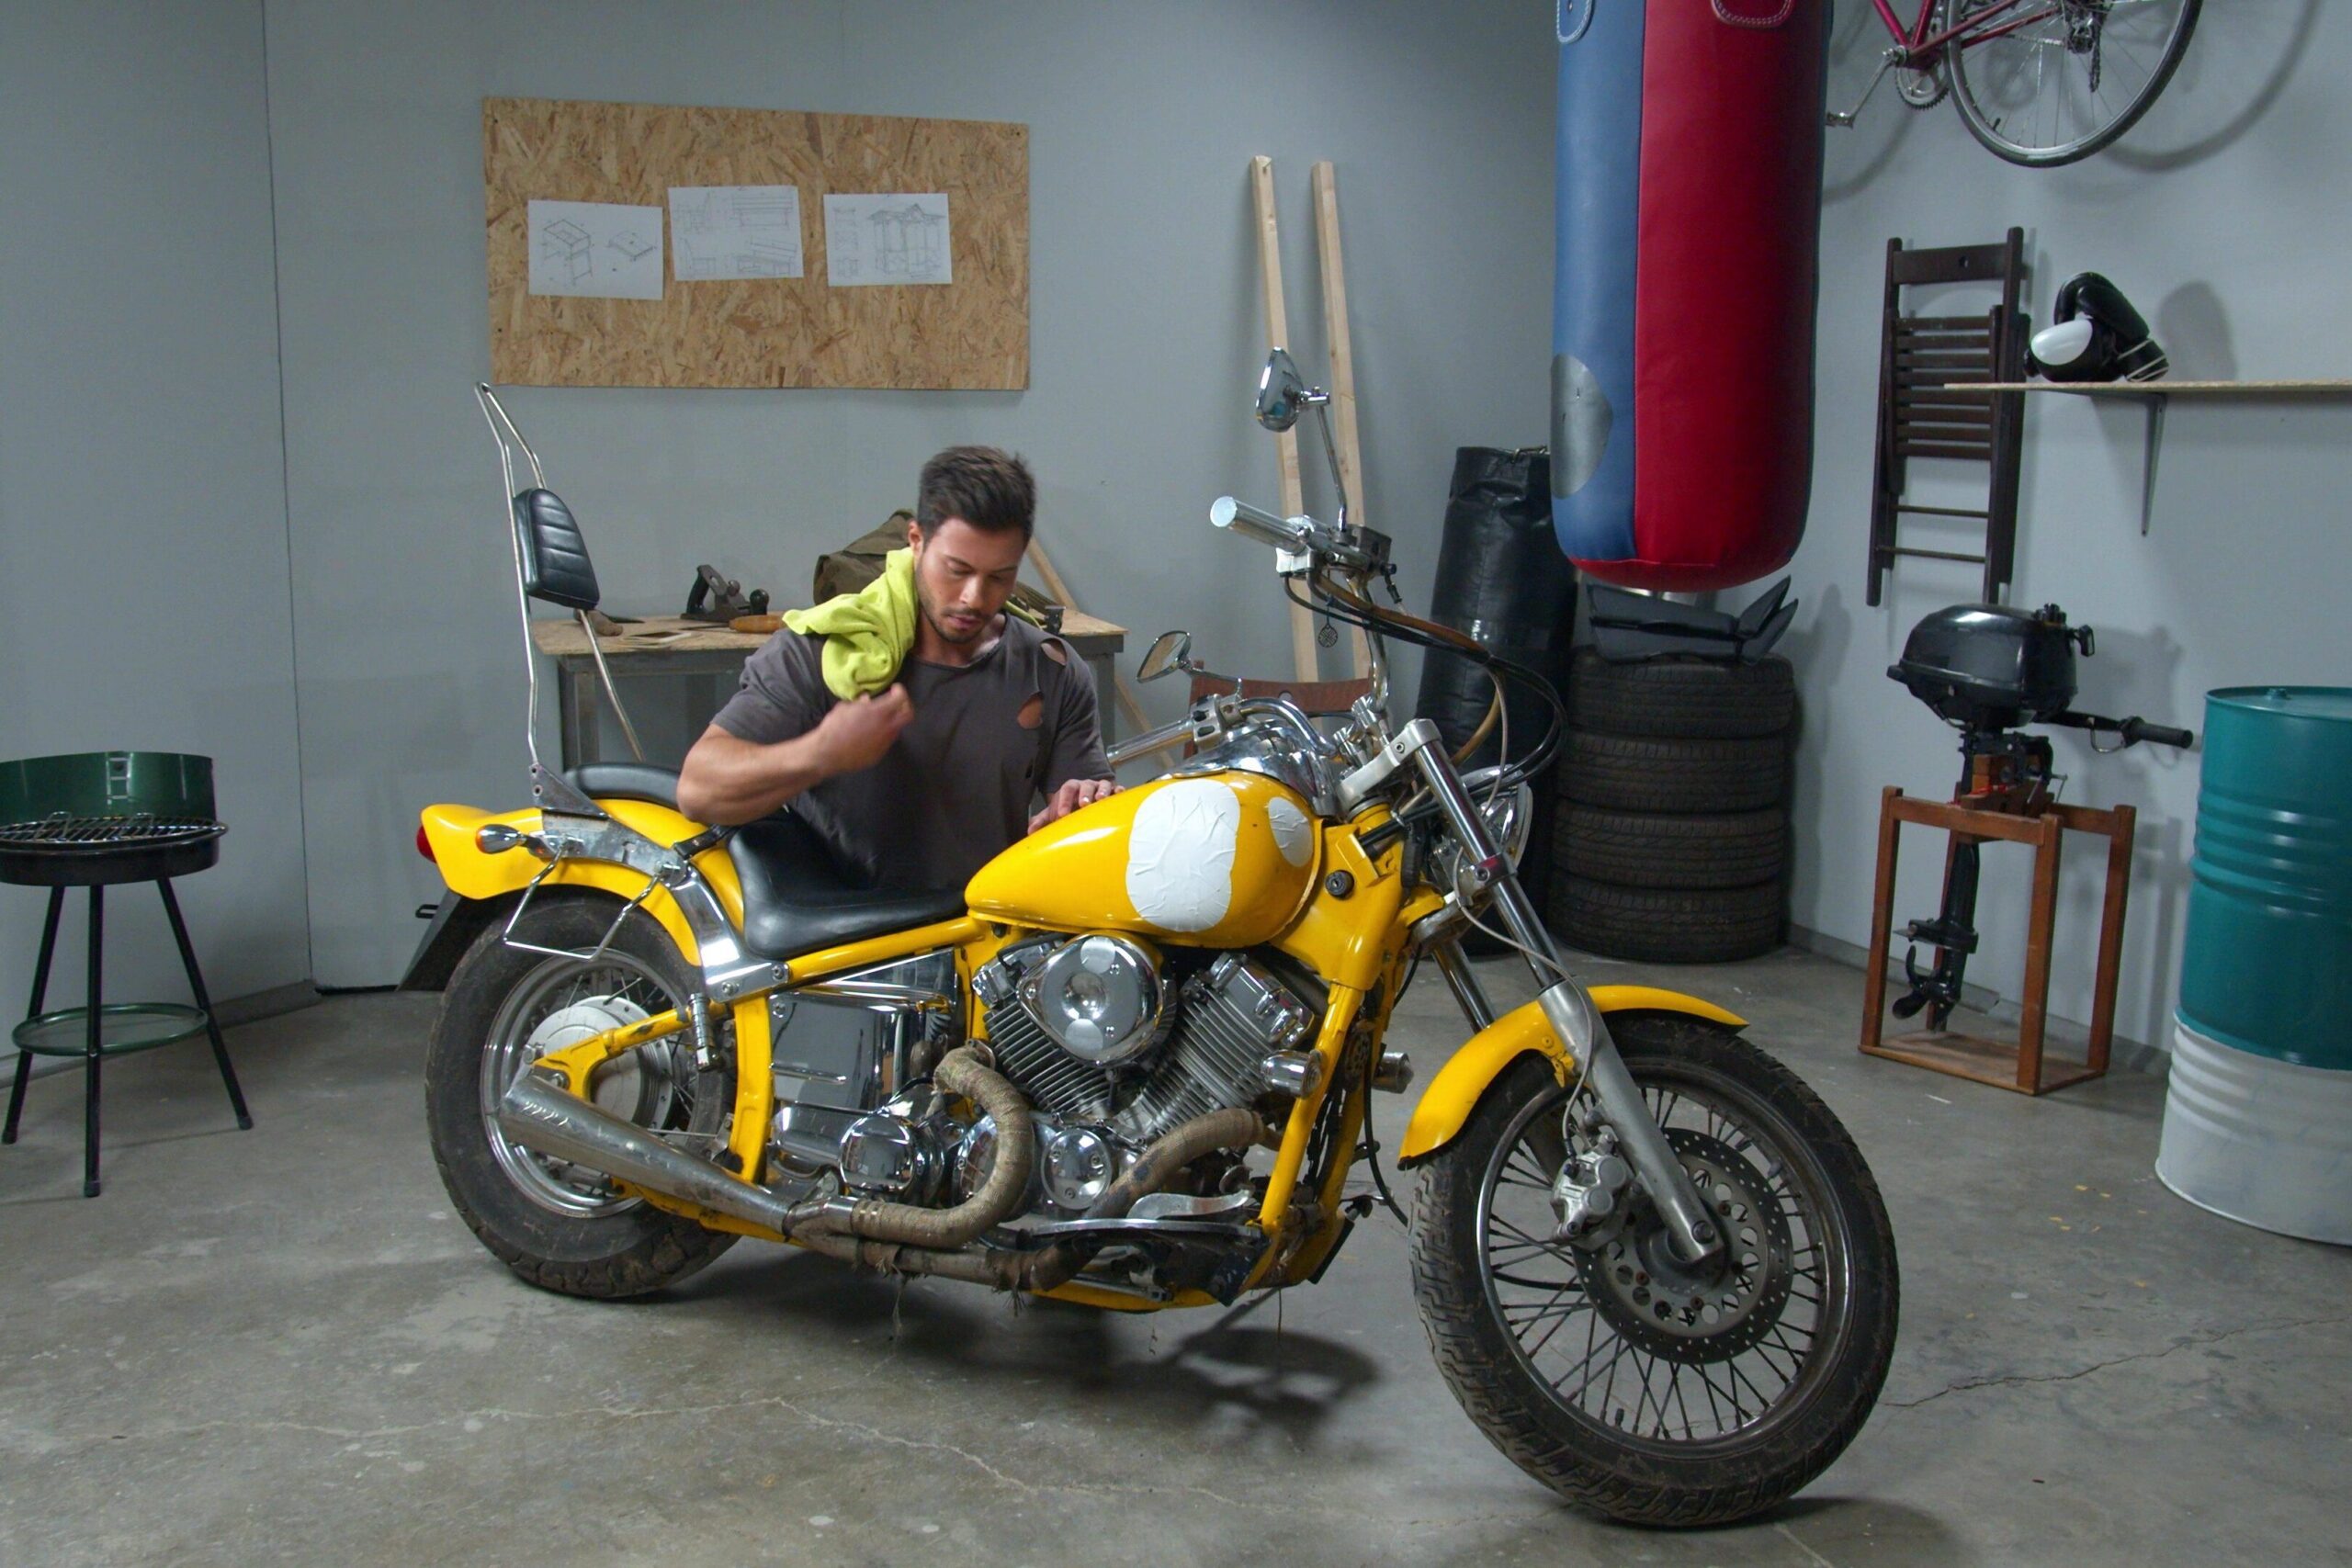 A man is working on a motorcycle inside a garage.